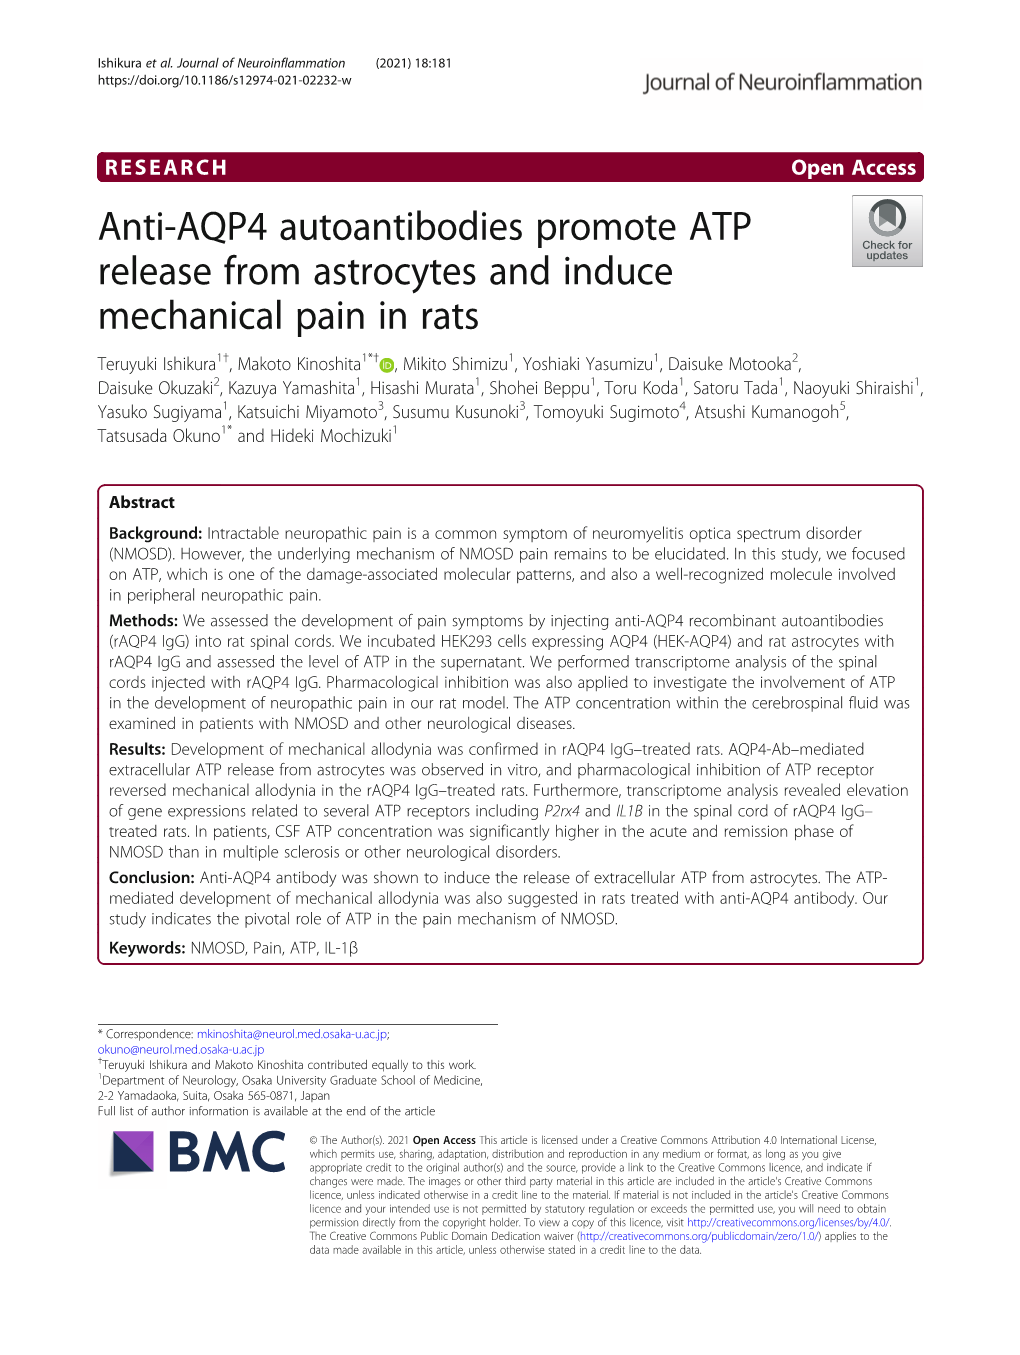 Anti-AQP4 Autoantibodies Promote ATP Release from Astrocytes And